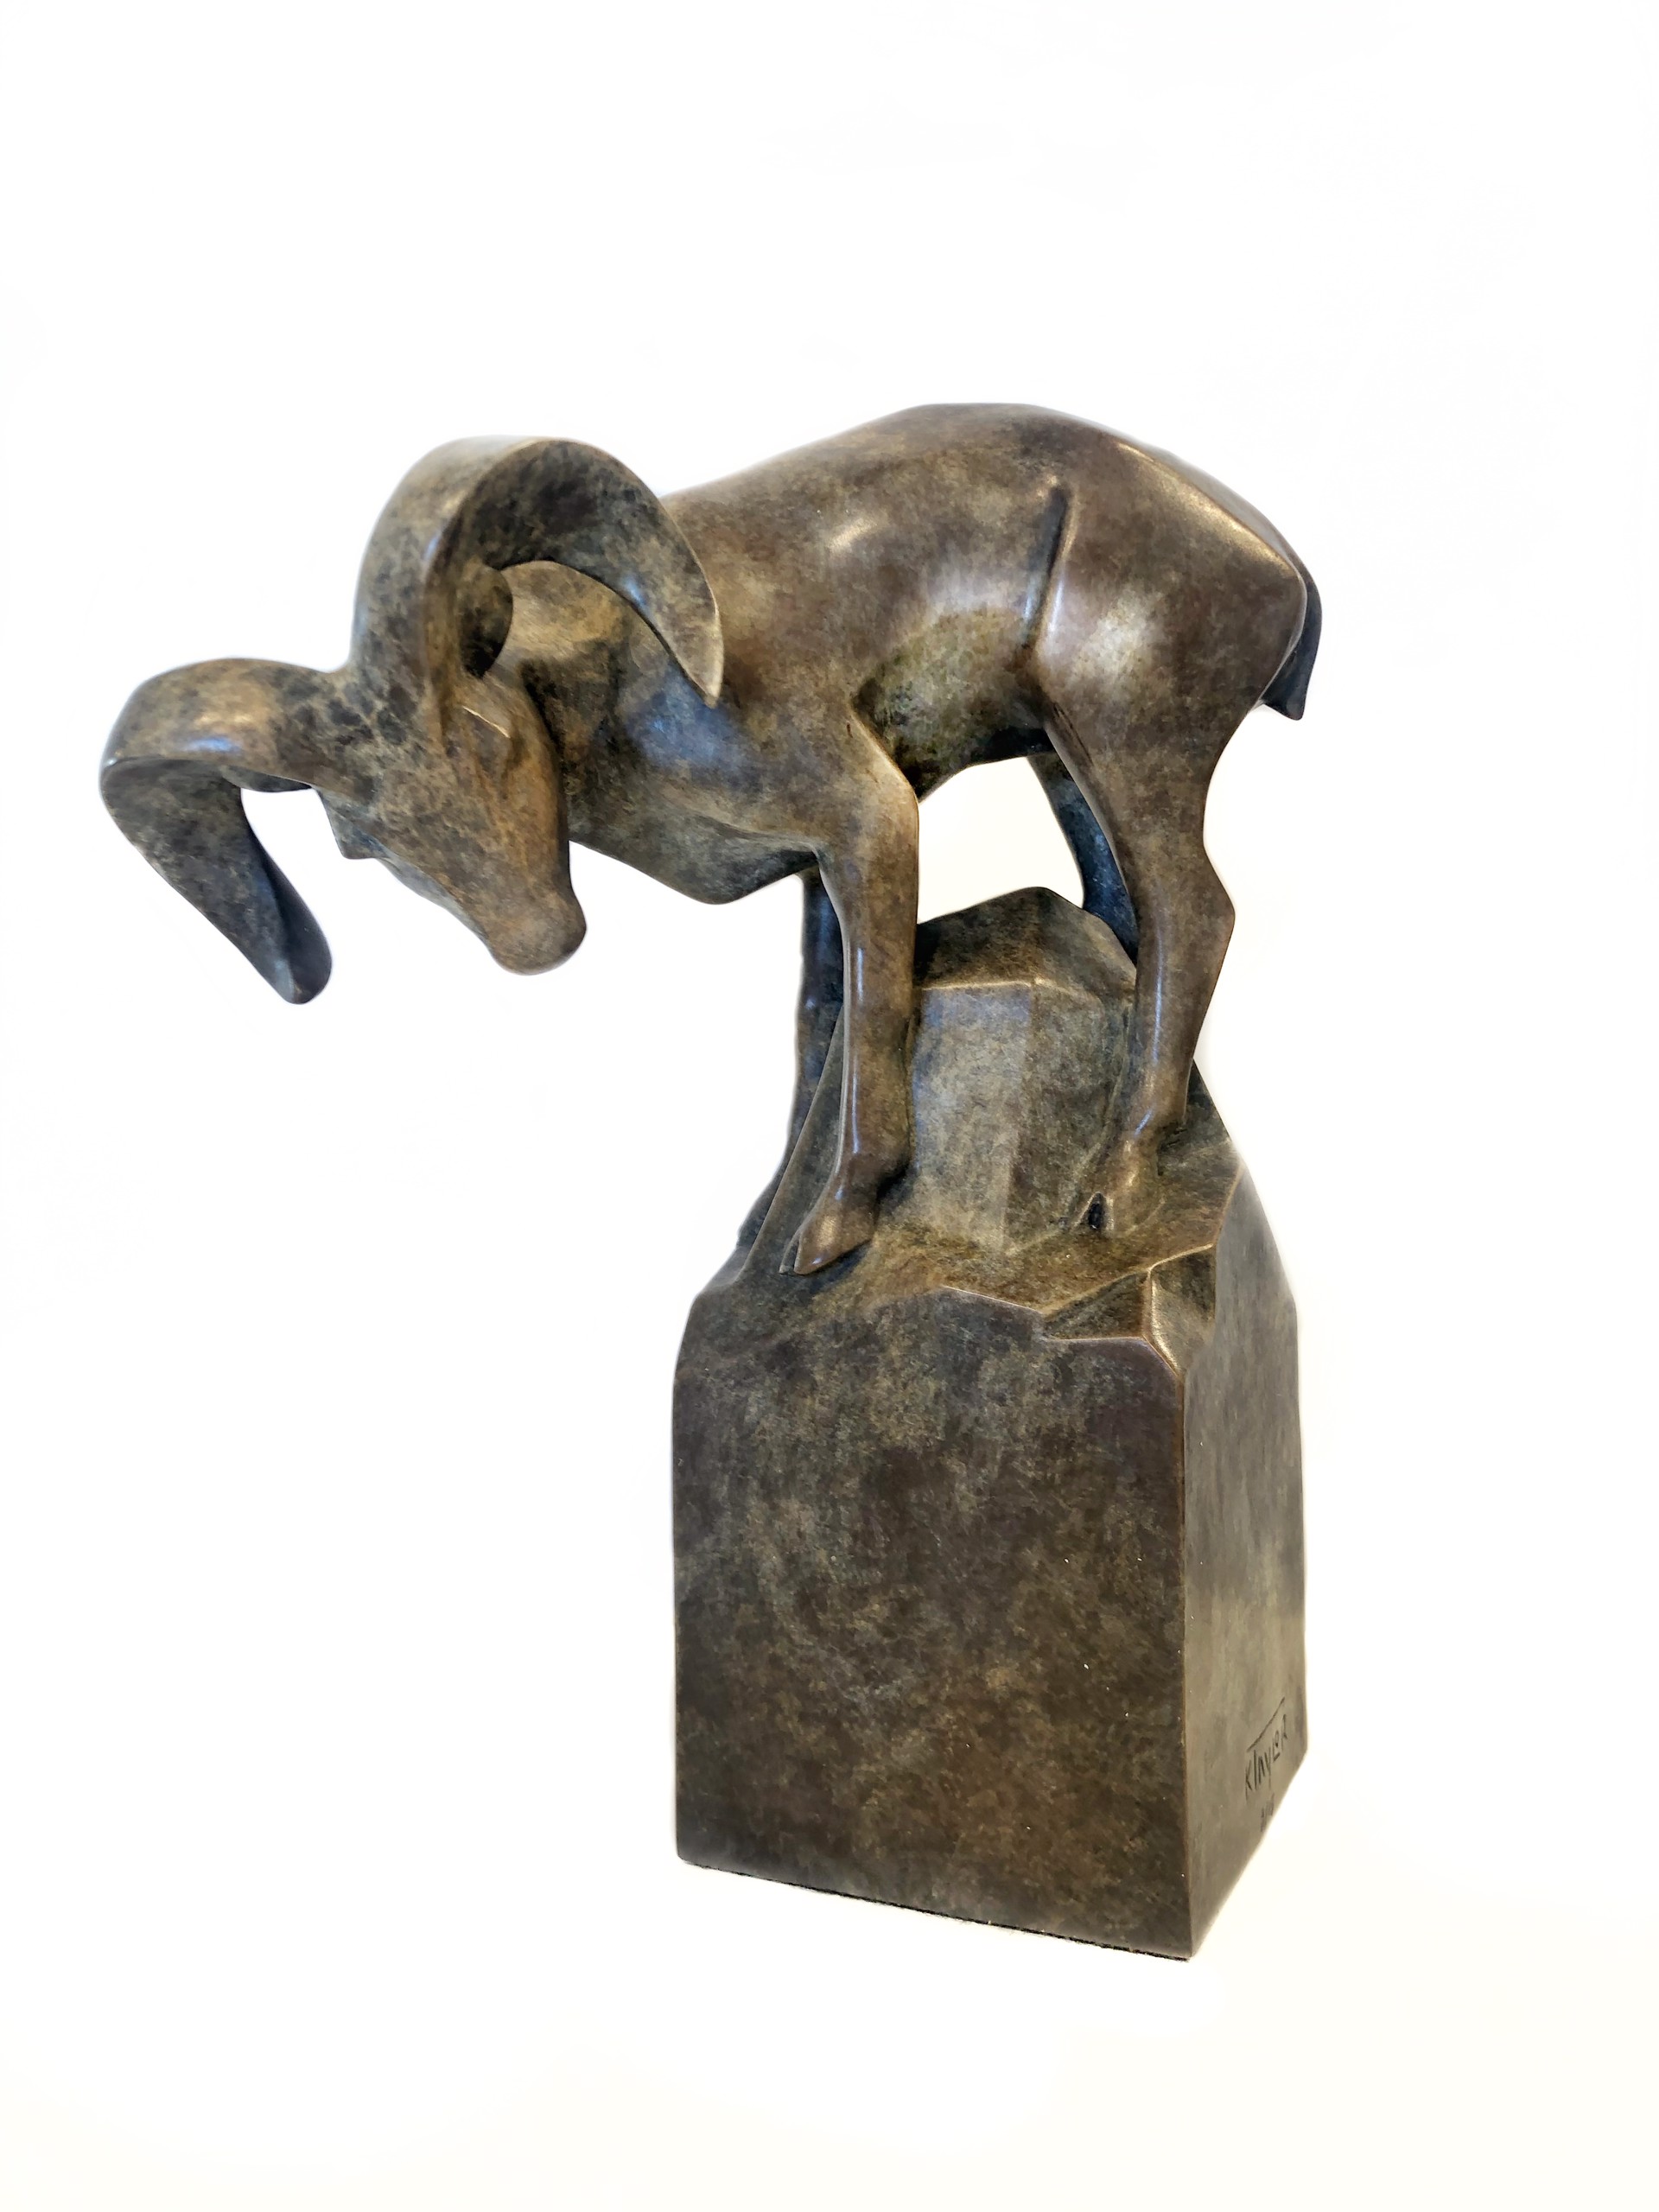 Limited Edition Bronze Sculpture Of A Bighorn Sheep Ram Perched On A Block, By Kristine Taylor